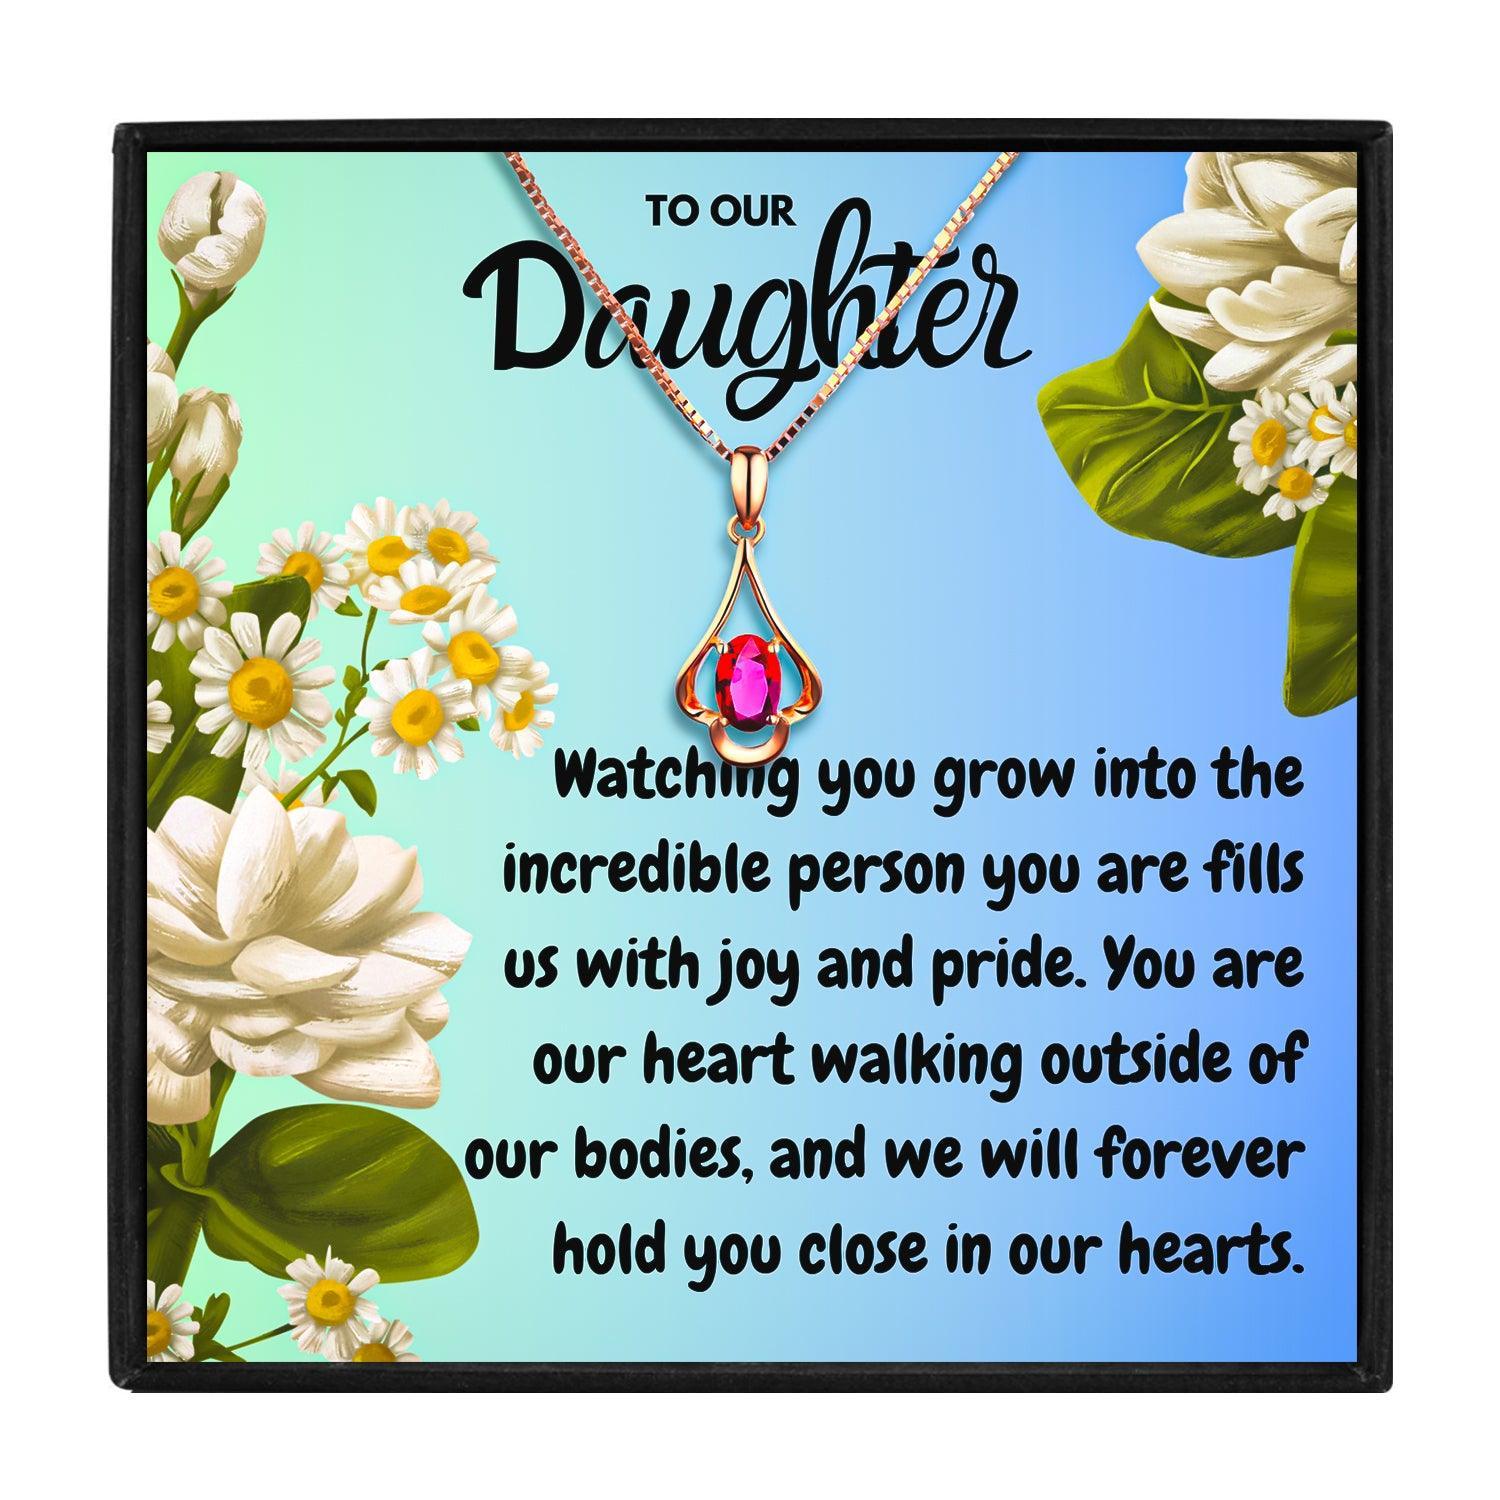 To Our Daughter Necklace With Personalized Message Card for Christmas 2023 | To Our Daughter Necklace With Personalized Message Card - undefined | For My Daughter necklace, Meaningful Daughter Necklaces, Mother Daughter Necklace, To my daughter necklace, To Our Daughter necklace | From Hunny Life | hunnylife.com